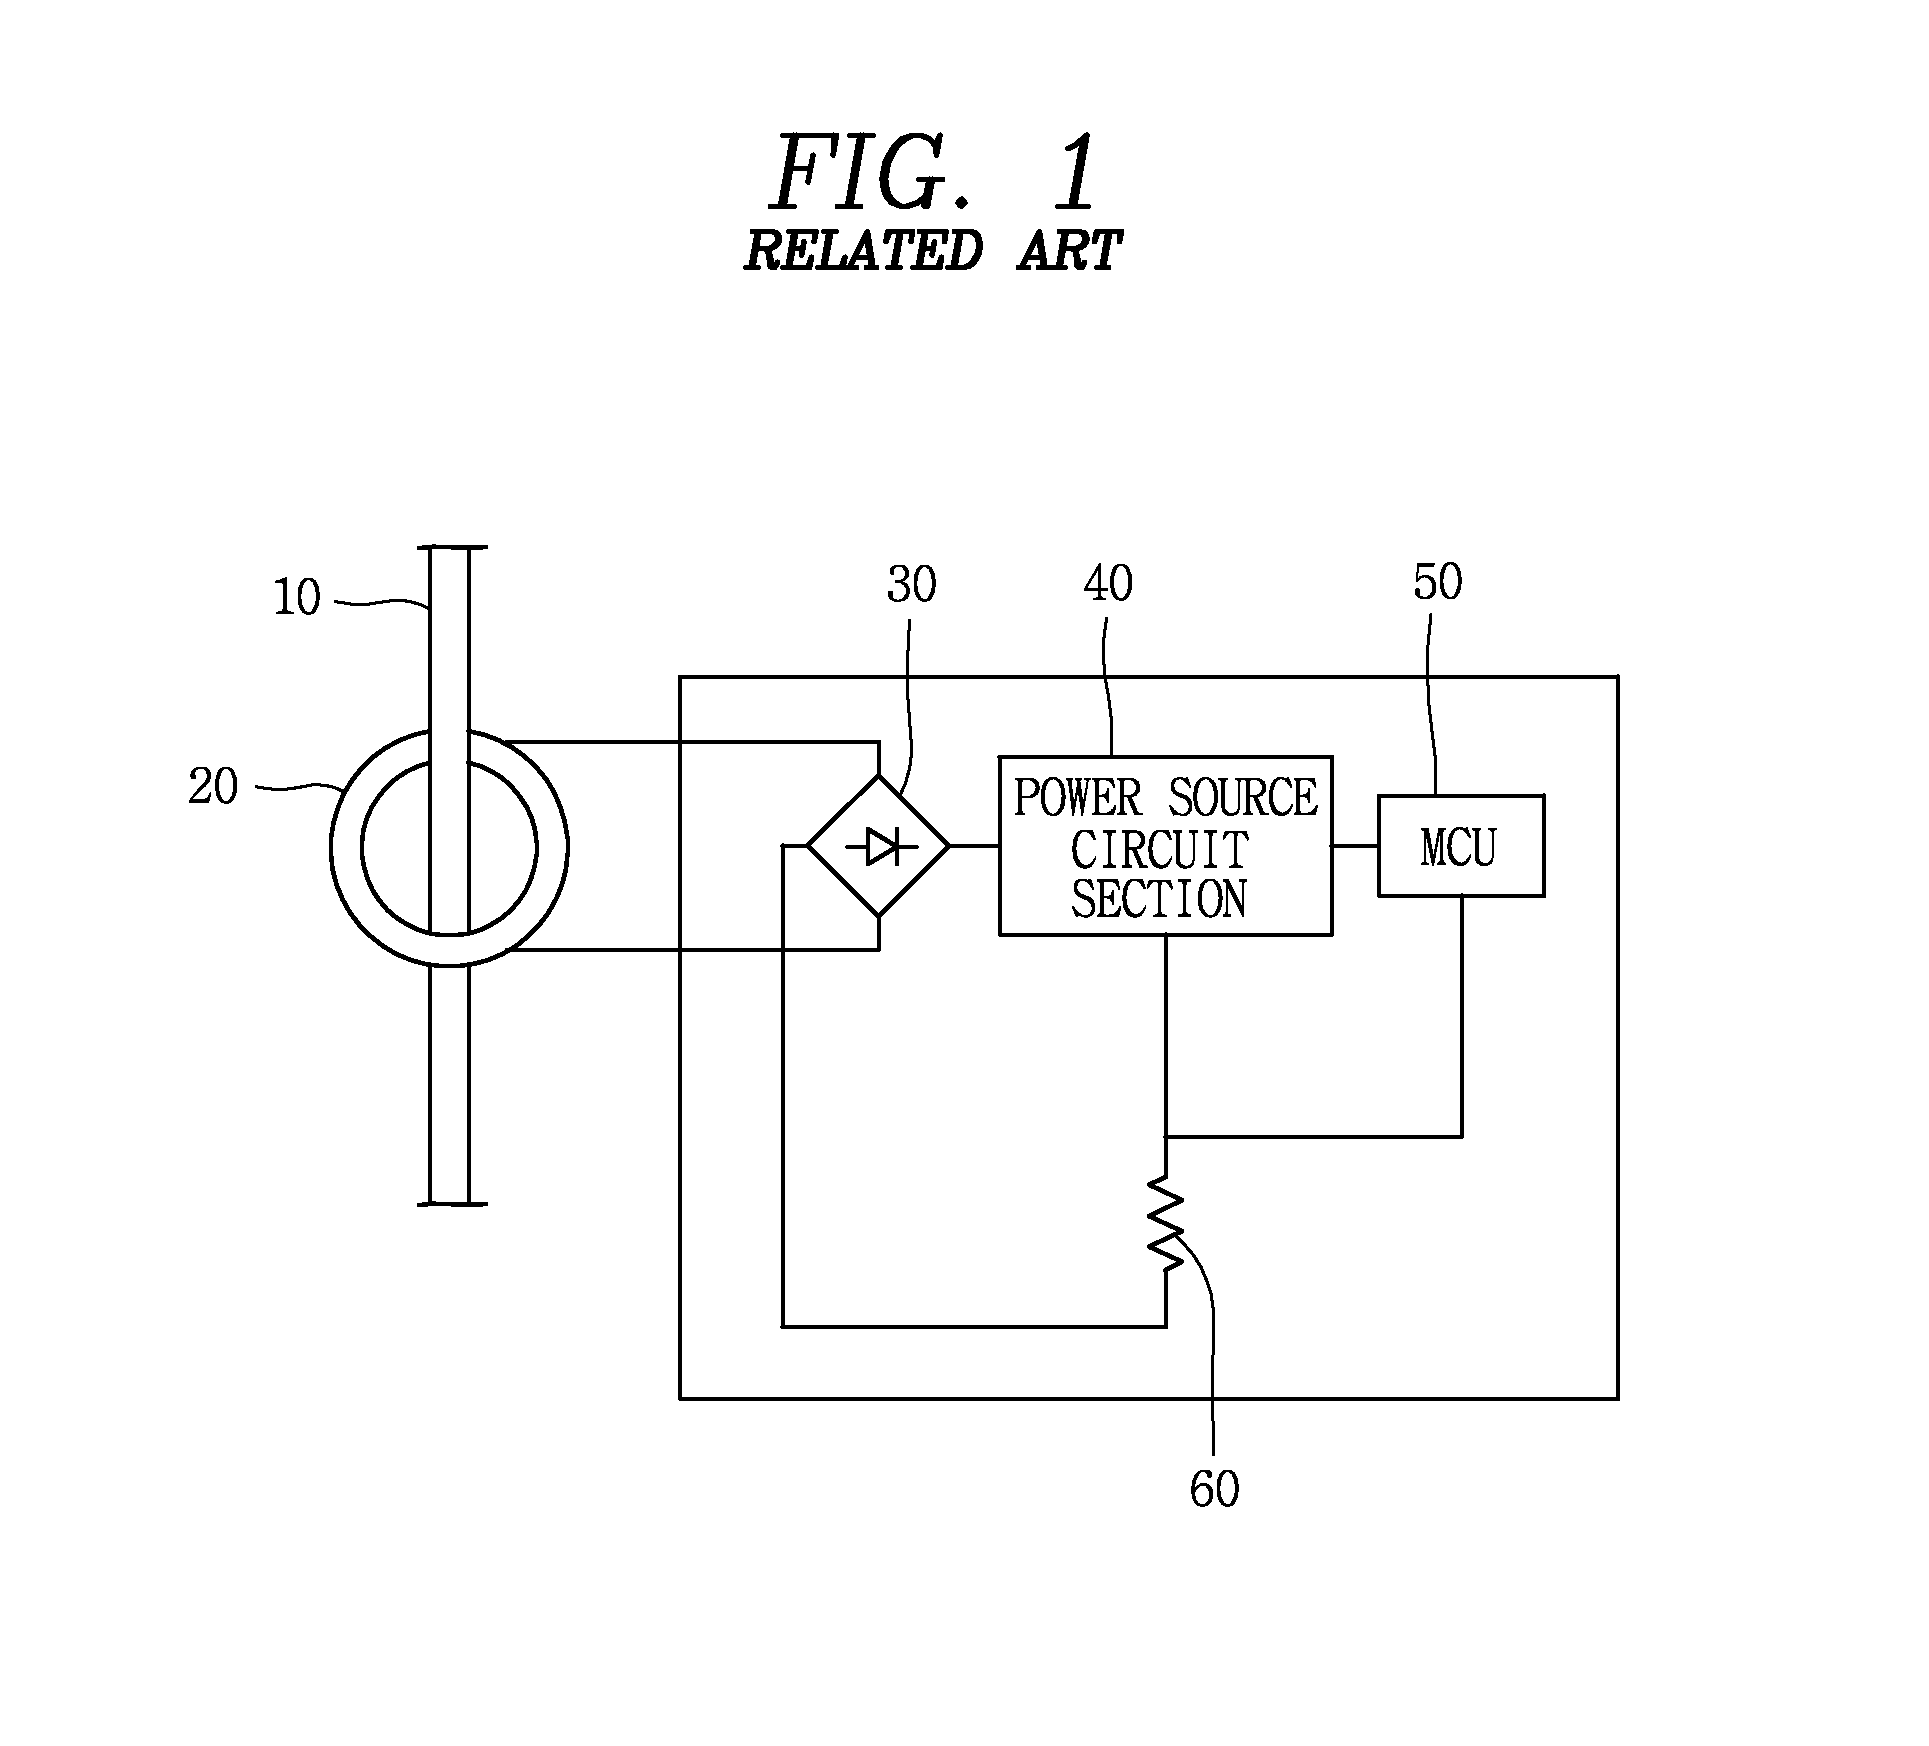 Self-power circuit for protecting relay